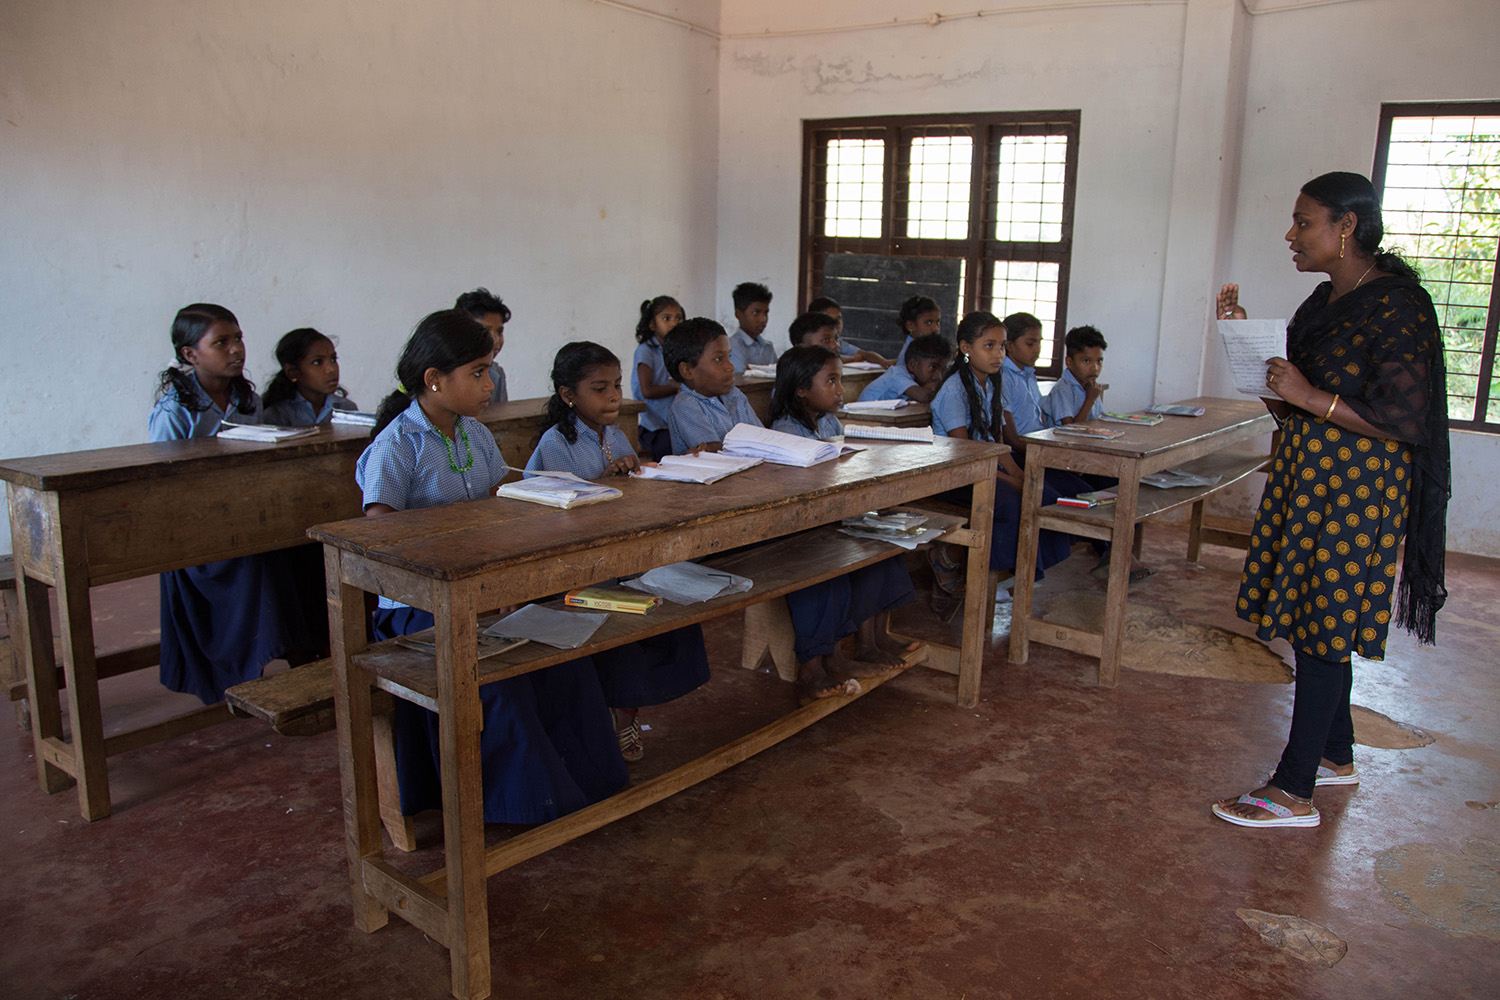 Education is free. The students are given books, pens, food, accommodation, and medical care. The classrooms are very simple, consisting of a few wooden benches and a blackboard.